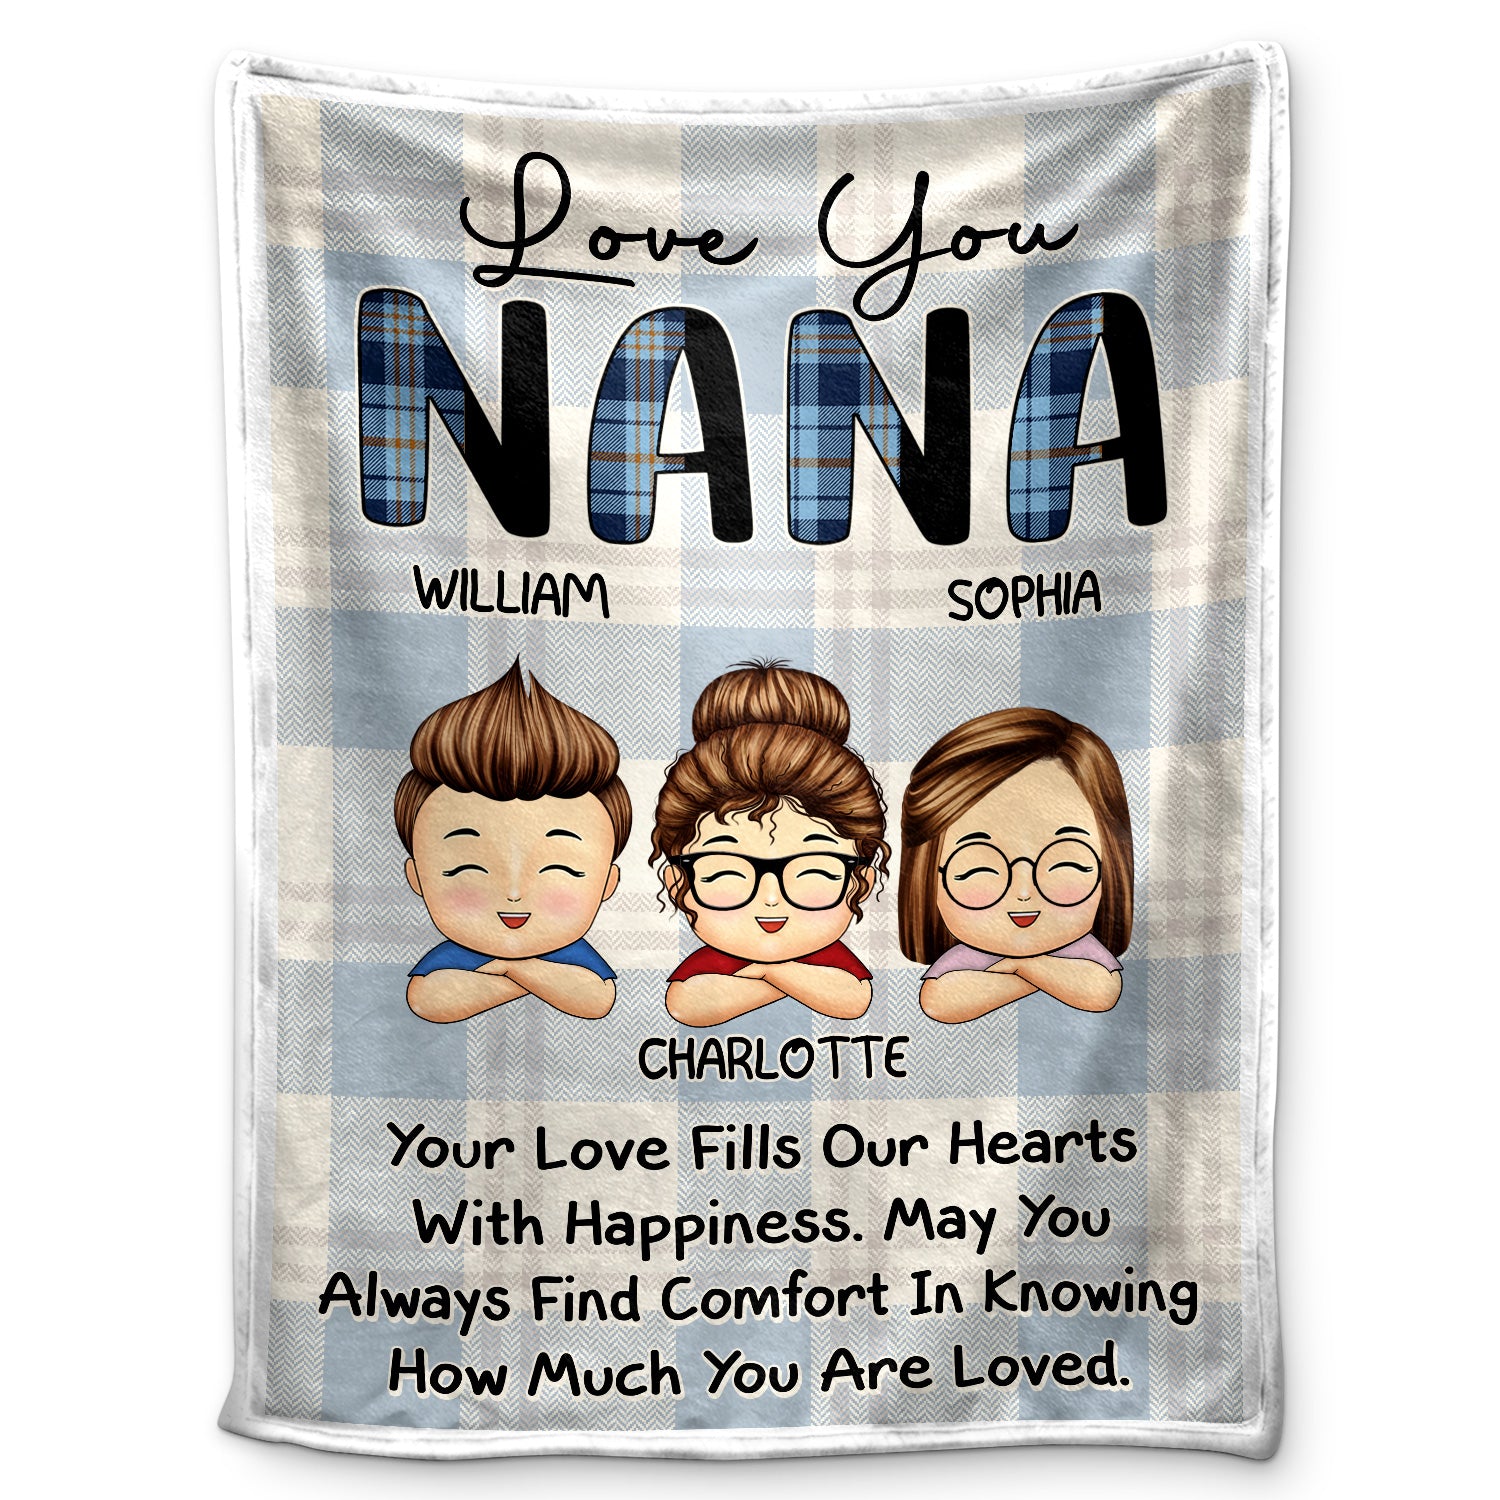 Your Love Fills Our Hearts - Loving Gifts For Grandma, Grandmother, Mom - Personalized Fleece Blanket